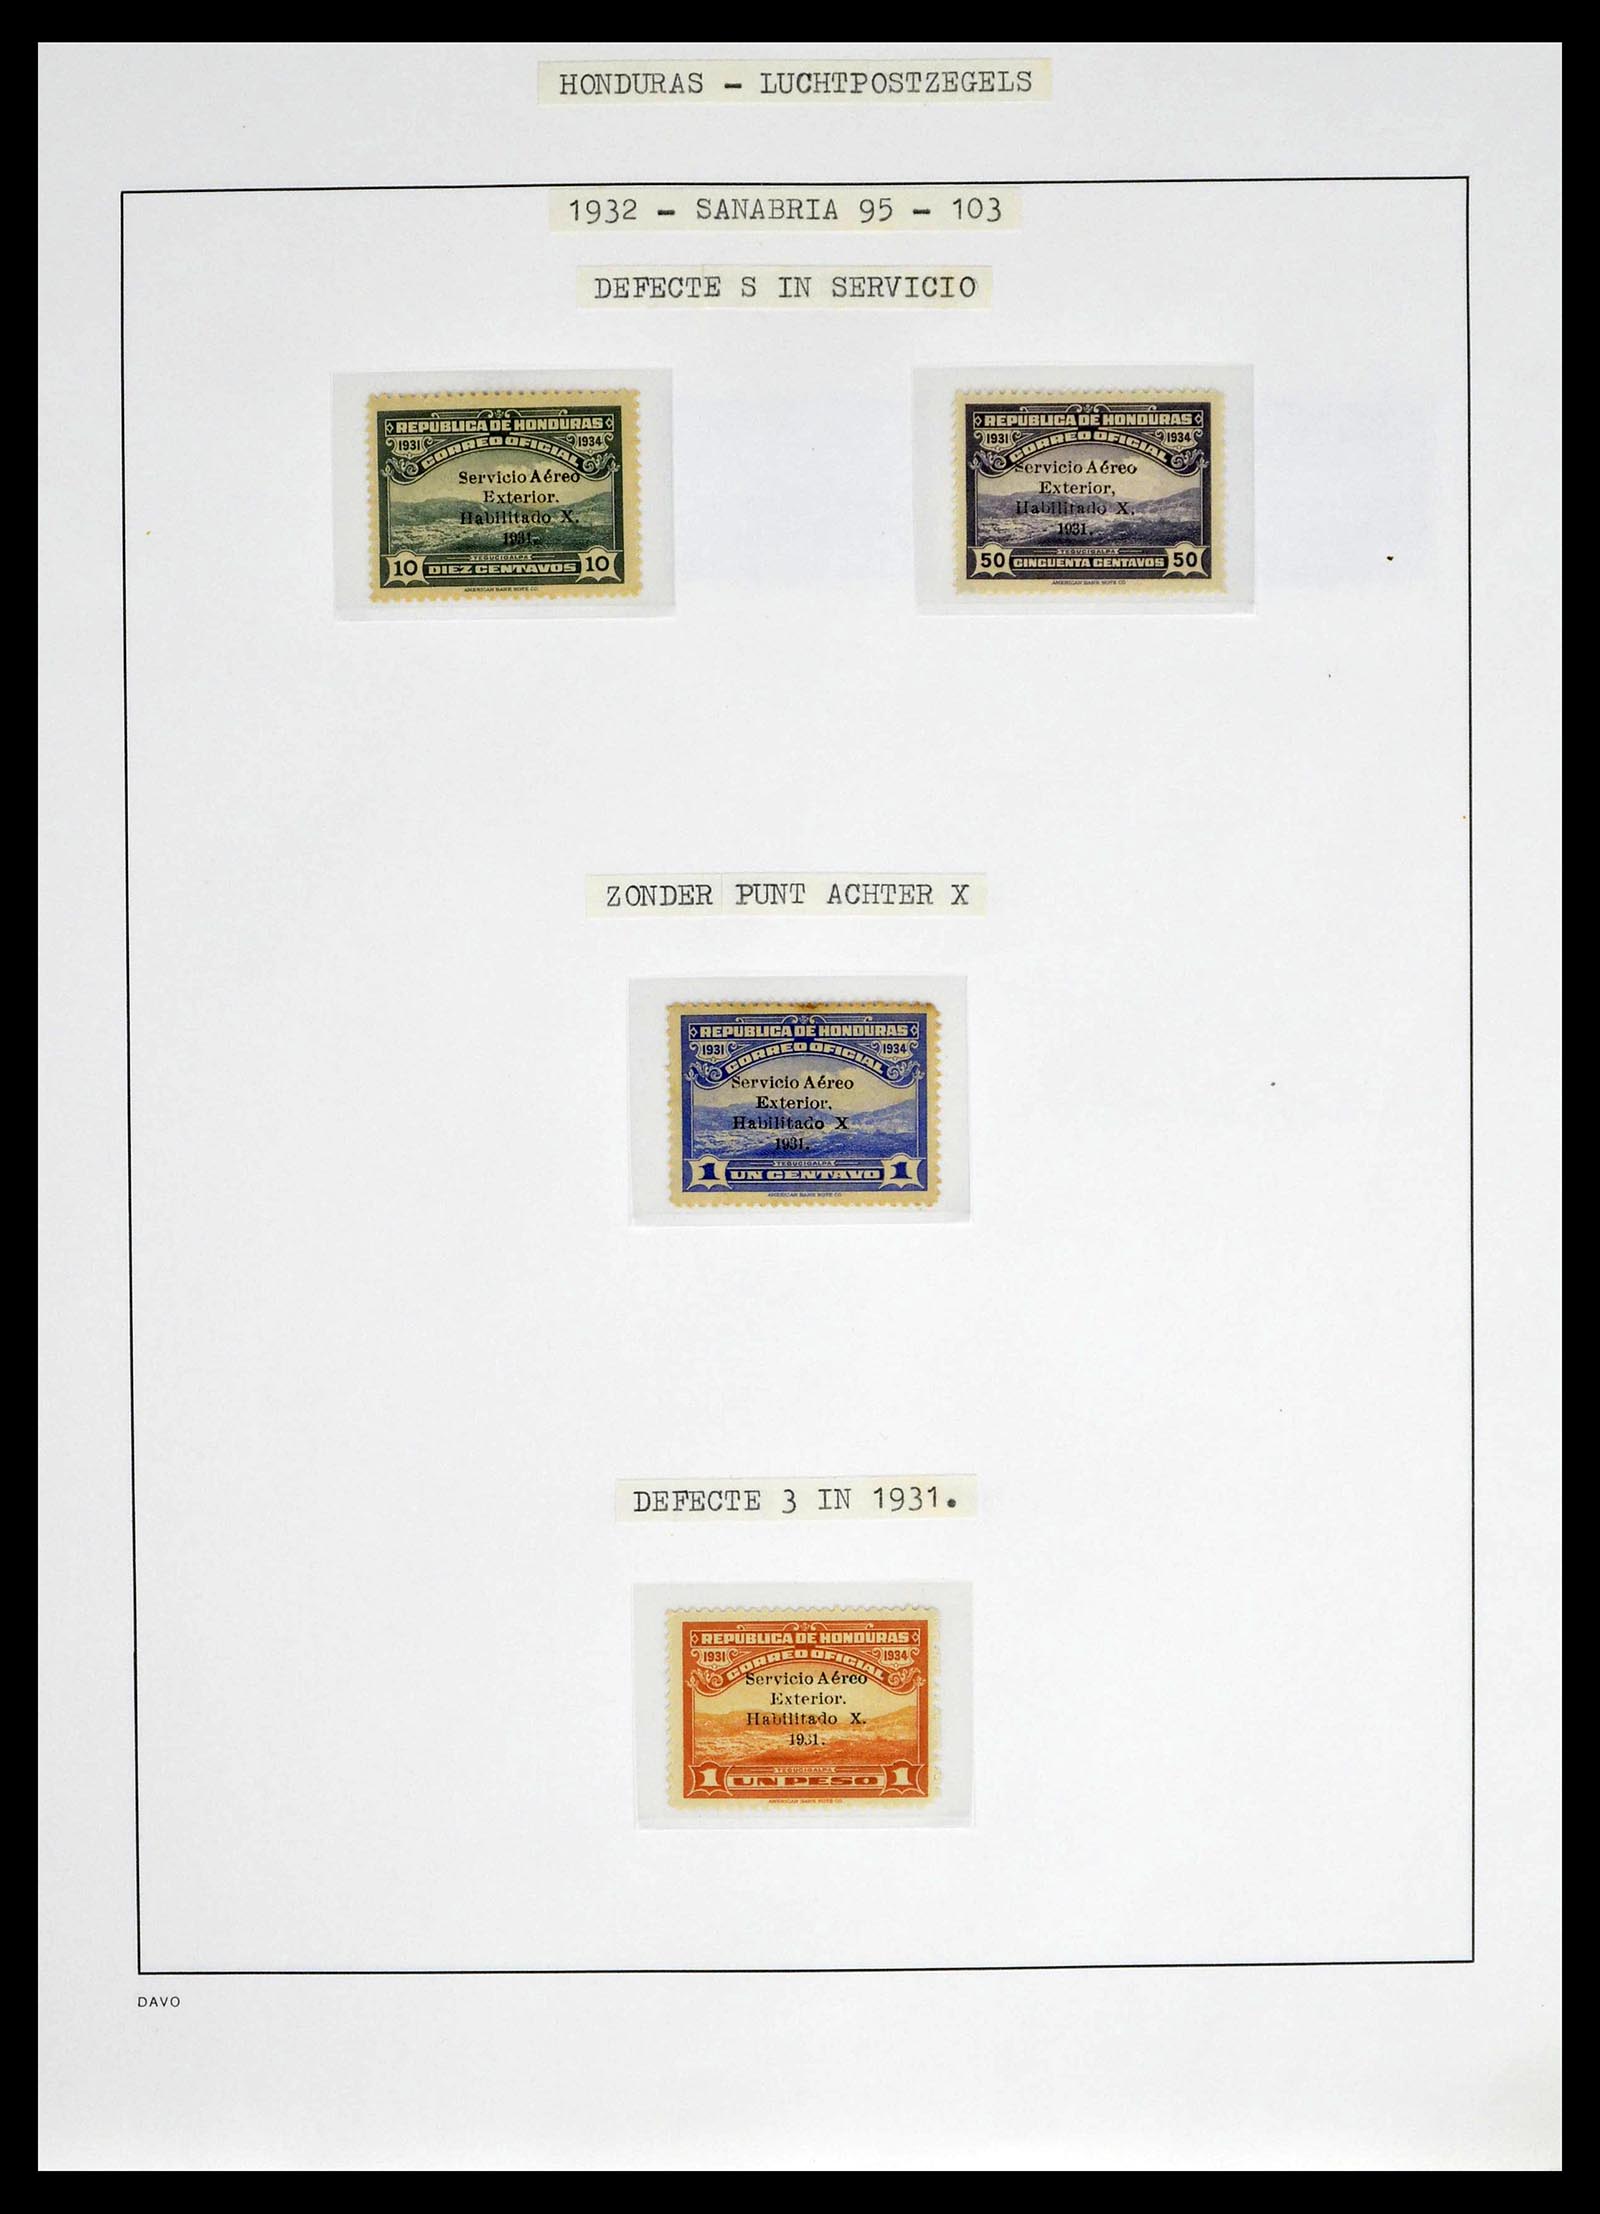 39410 0039 - Stamp collection 39410 Honduras topcollection airmail 1925-1984.